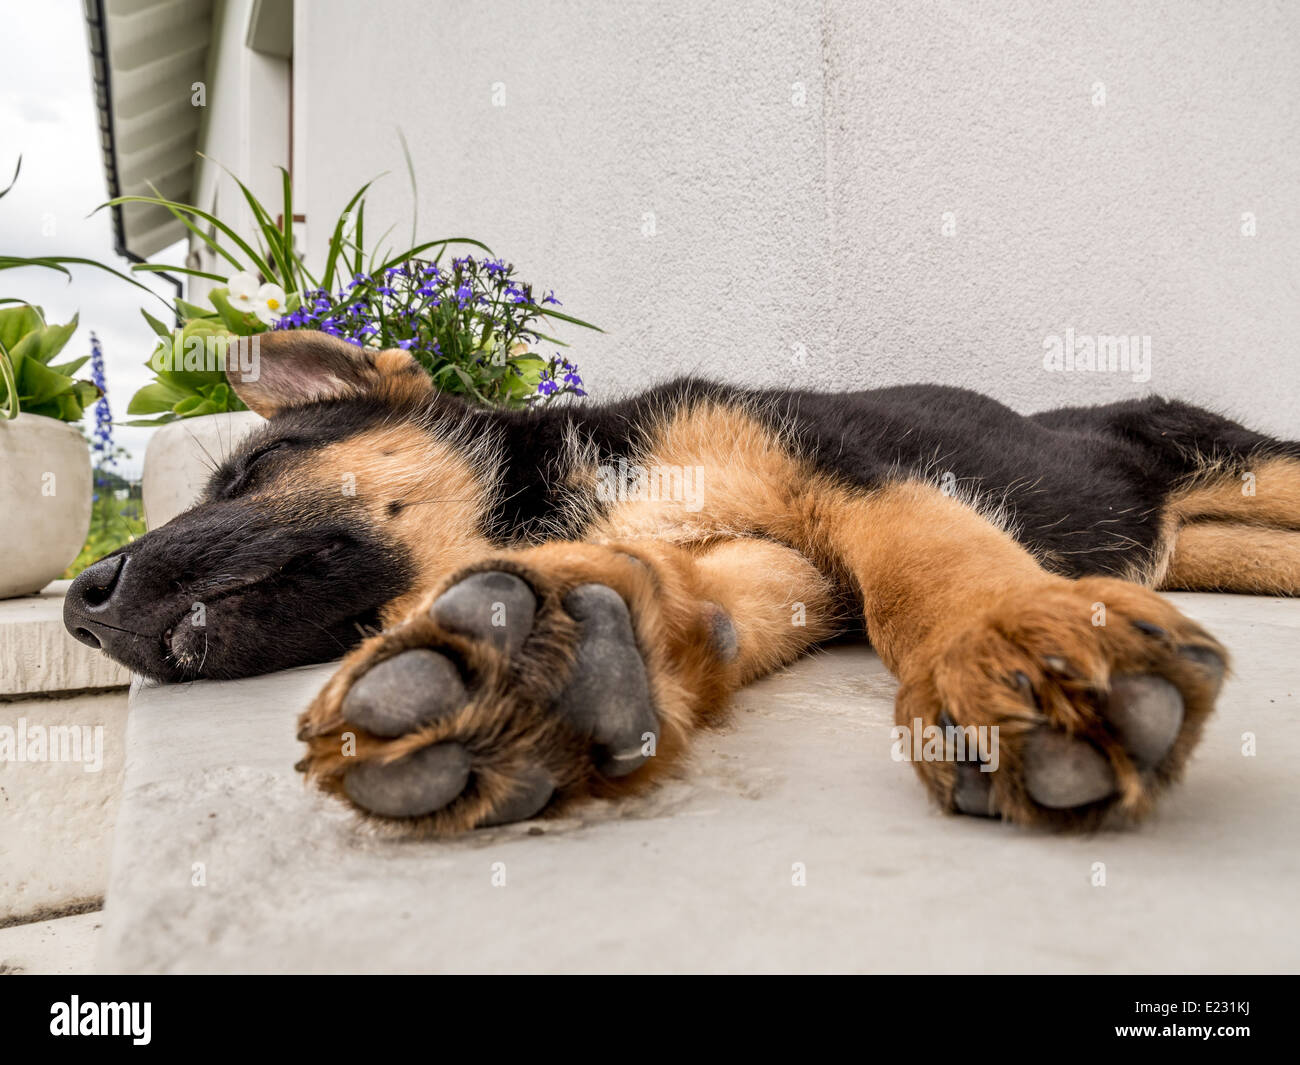 German shephard puppy blithely sleeping outside on the house porch Stock Photo